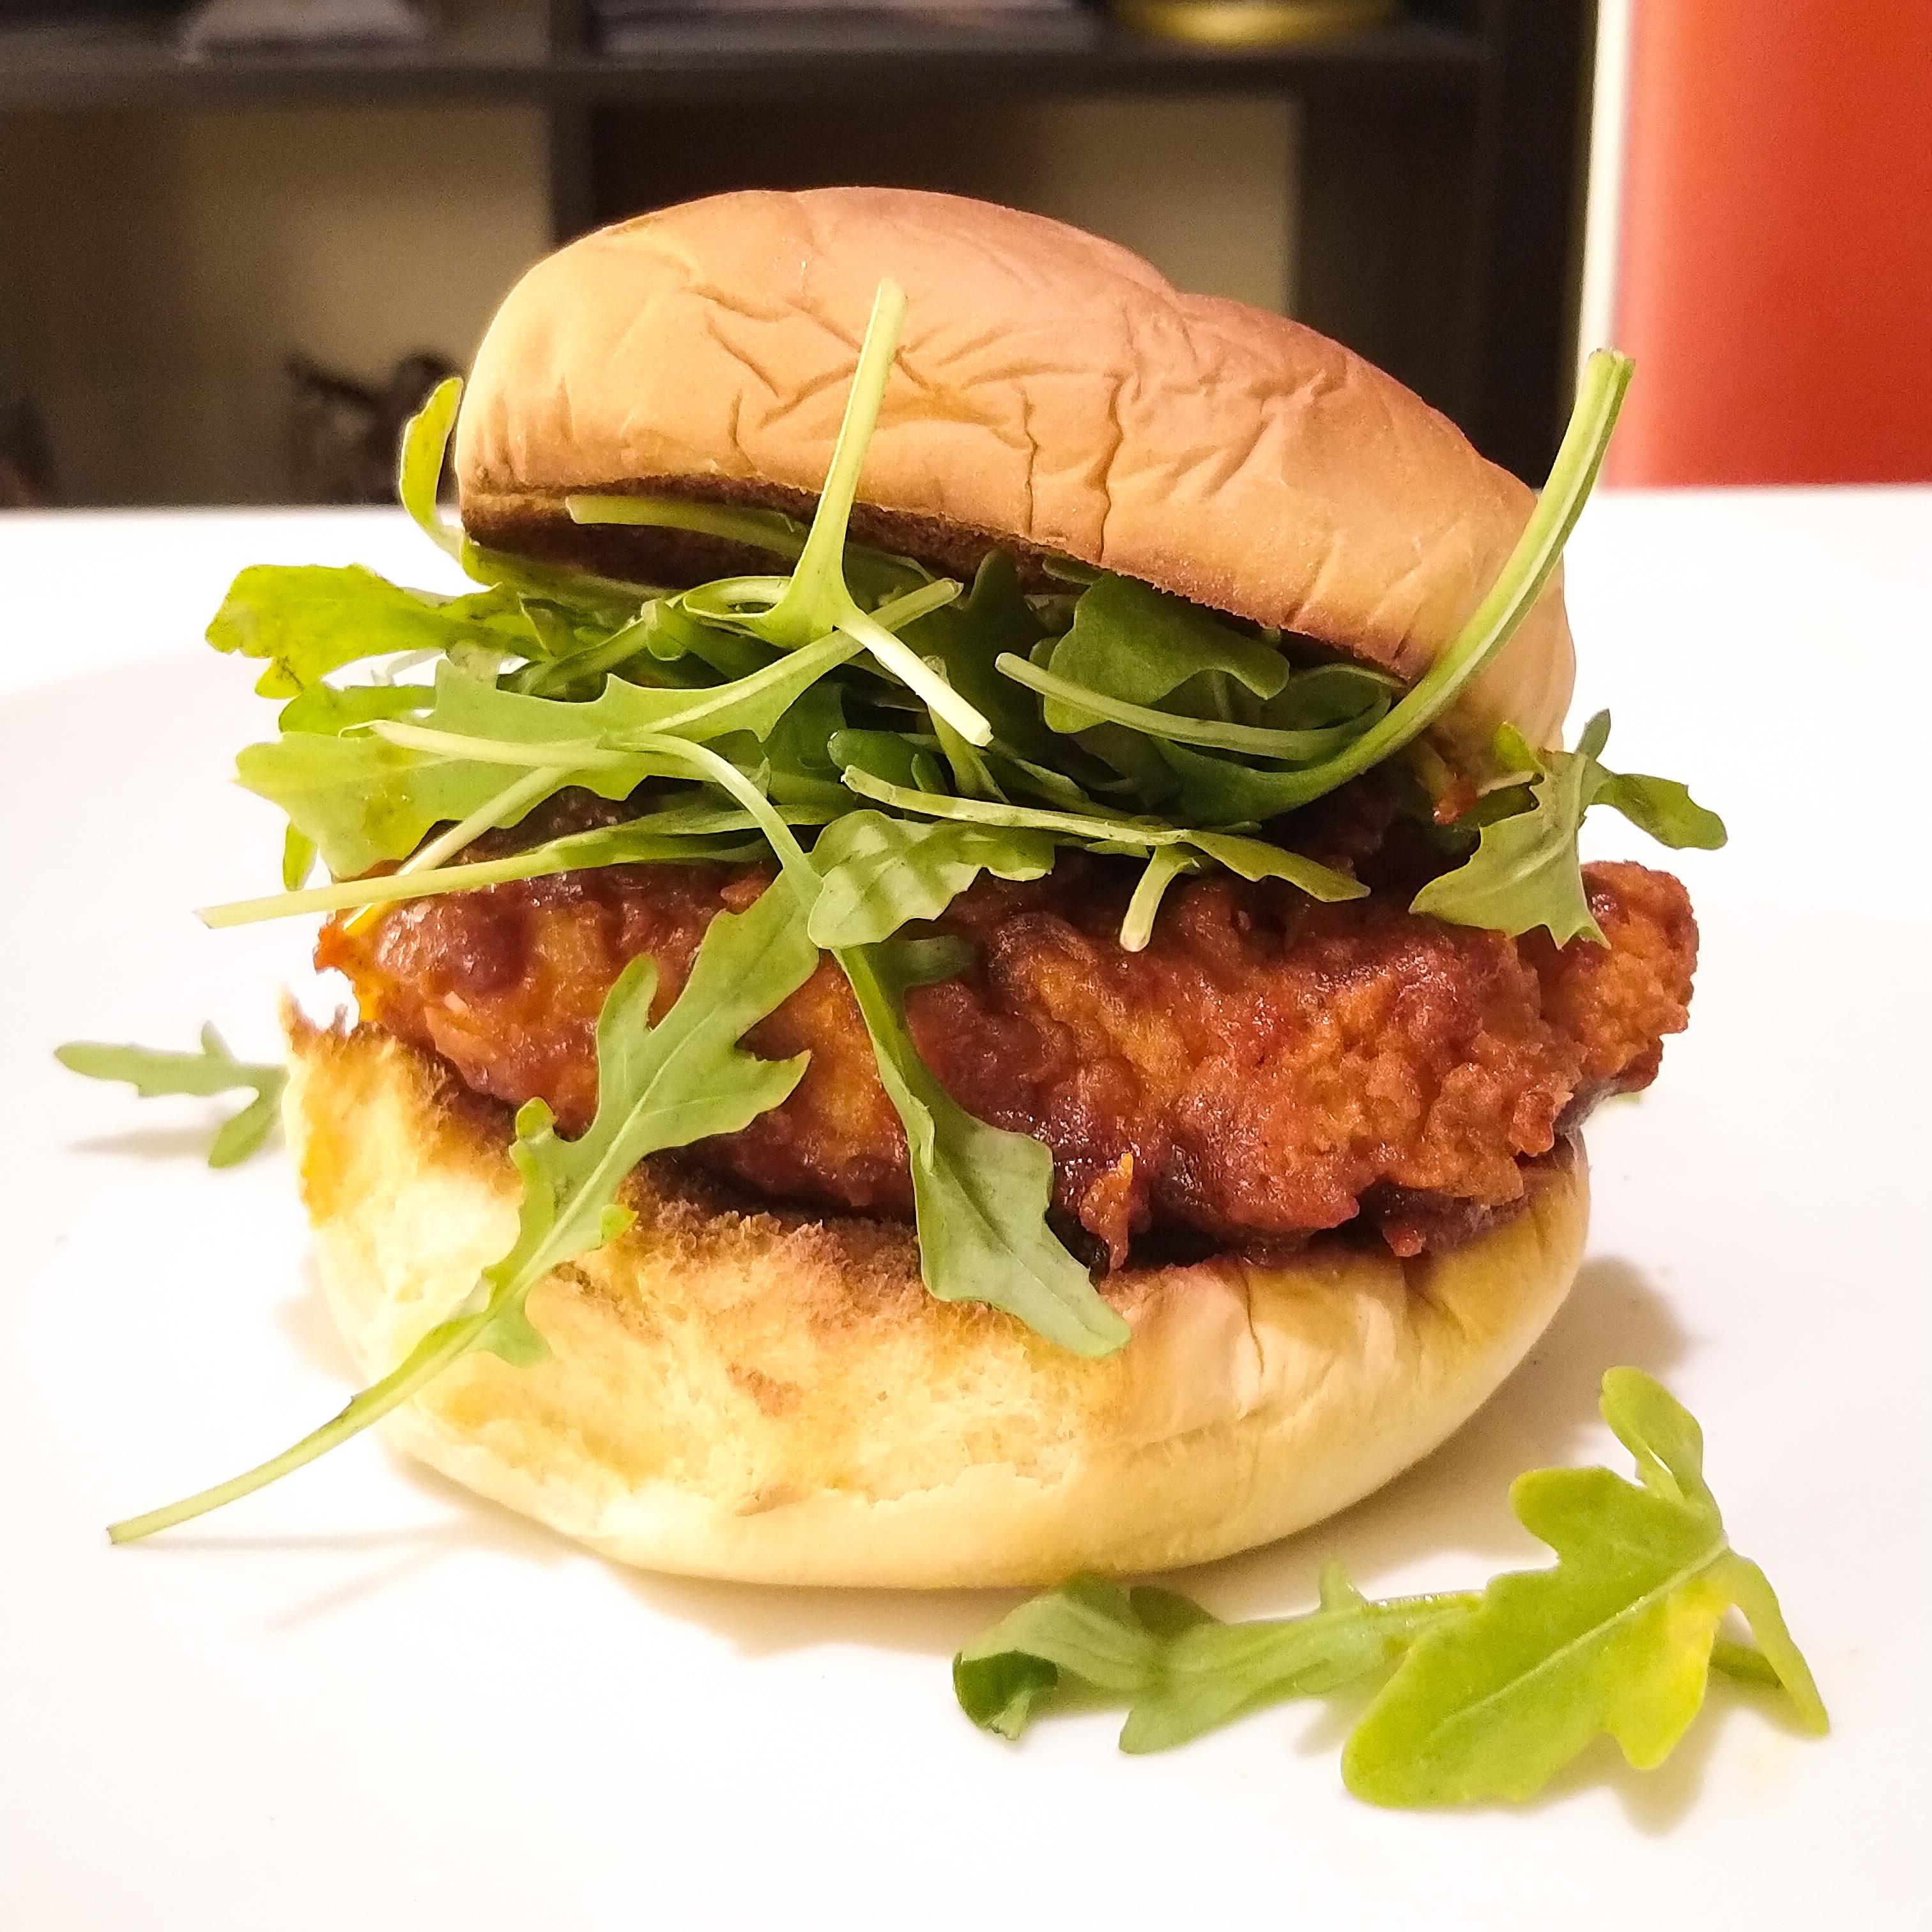 Made a fried Gochujang chicken sandwich! - Dining and Cooking